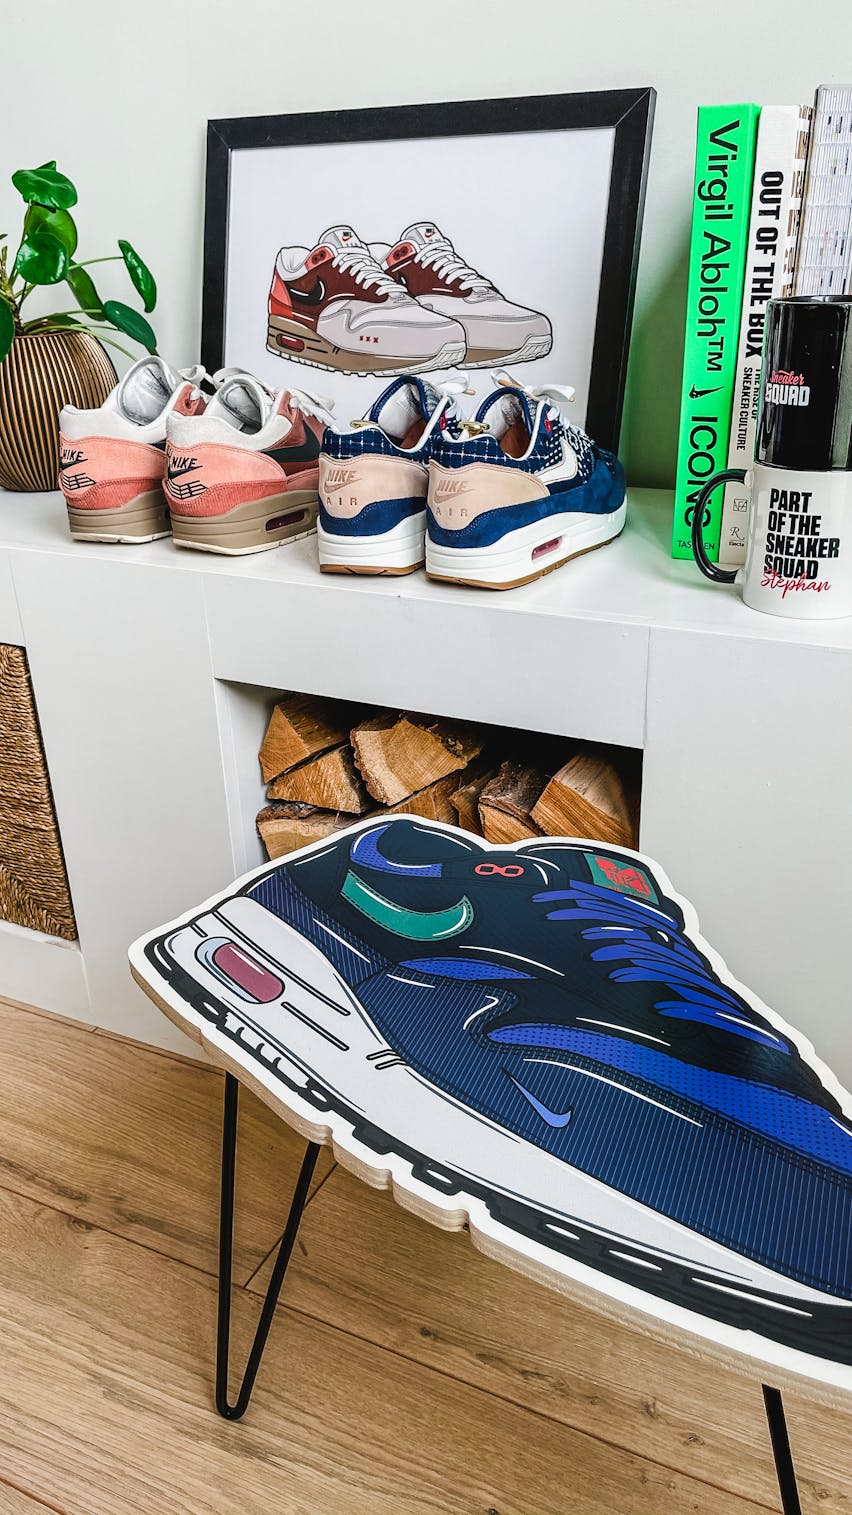 1 Sneaker Squad Air Table 1